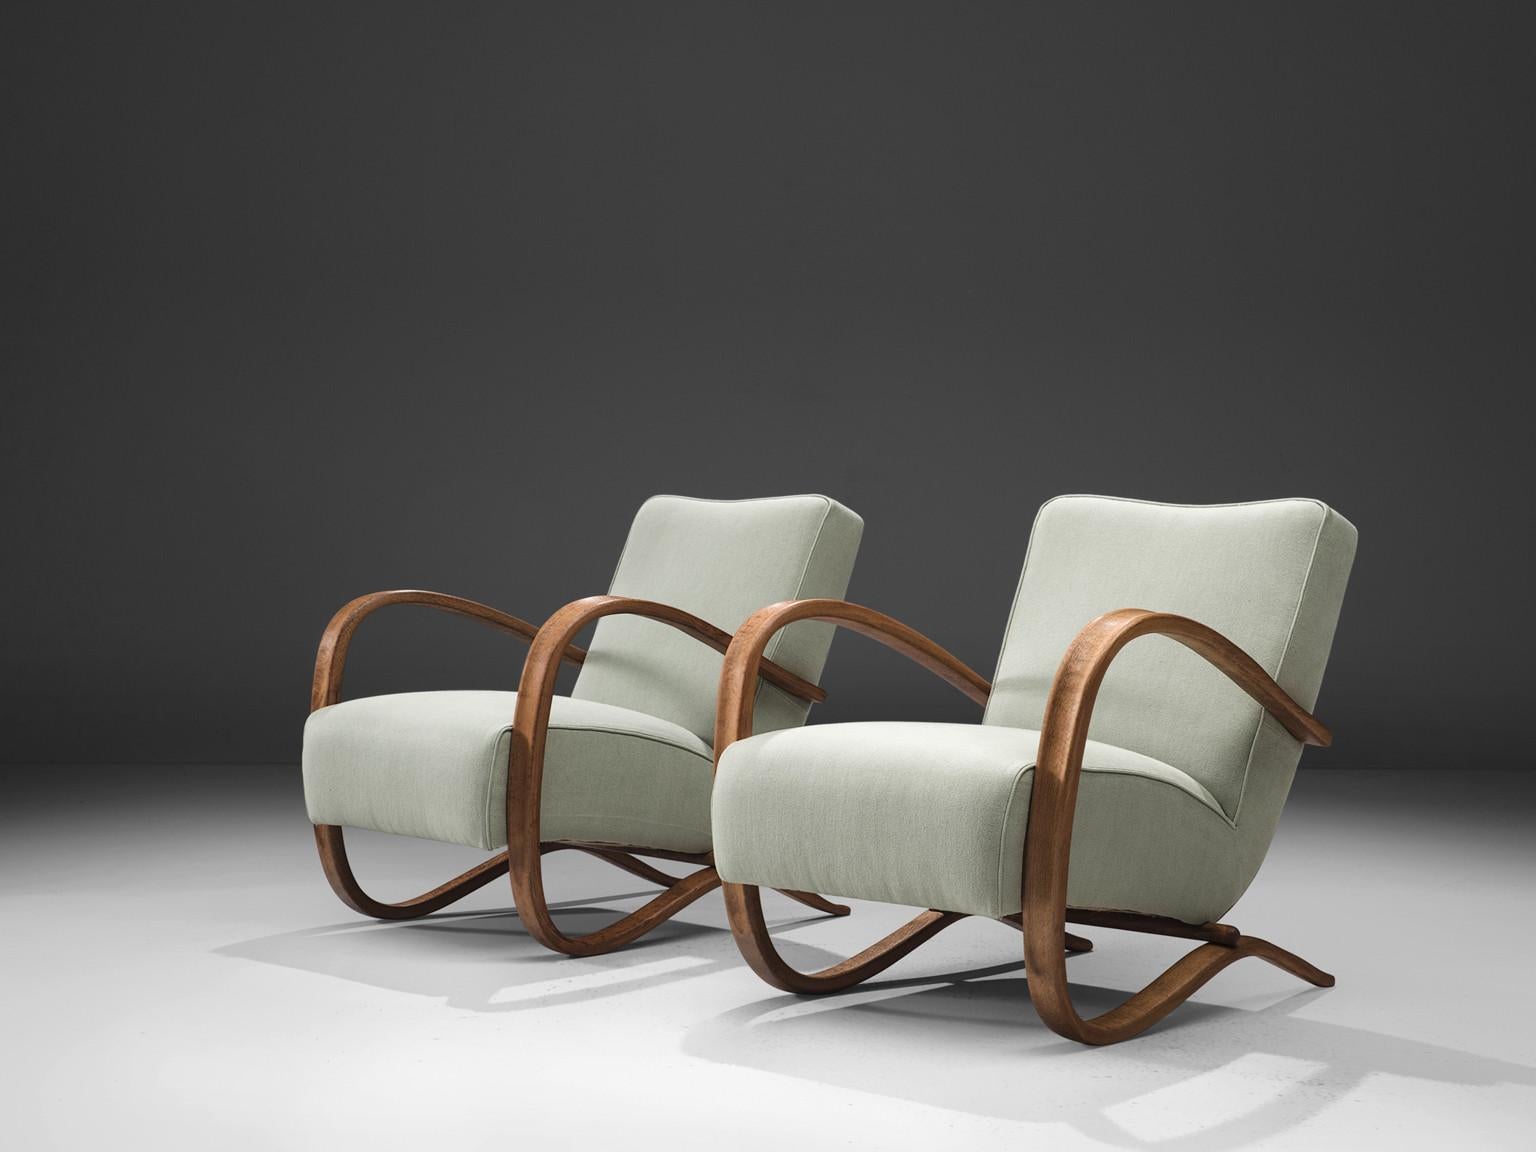 Jindrich Halabala, lounge chairs, model 'H269', stained beech, fabric, Czech Republic, 1930s.

Extraordinary easy chairs in mint green upholstery. These chairs have a very dynamic and abundant appearance and the pastel green upholstery gives them a